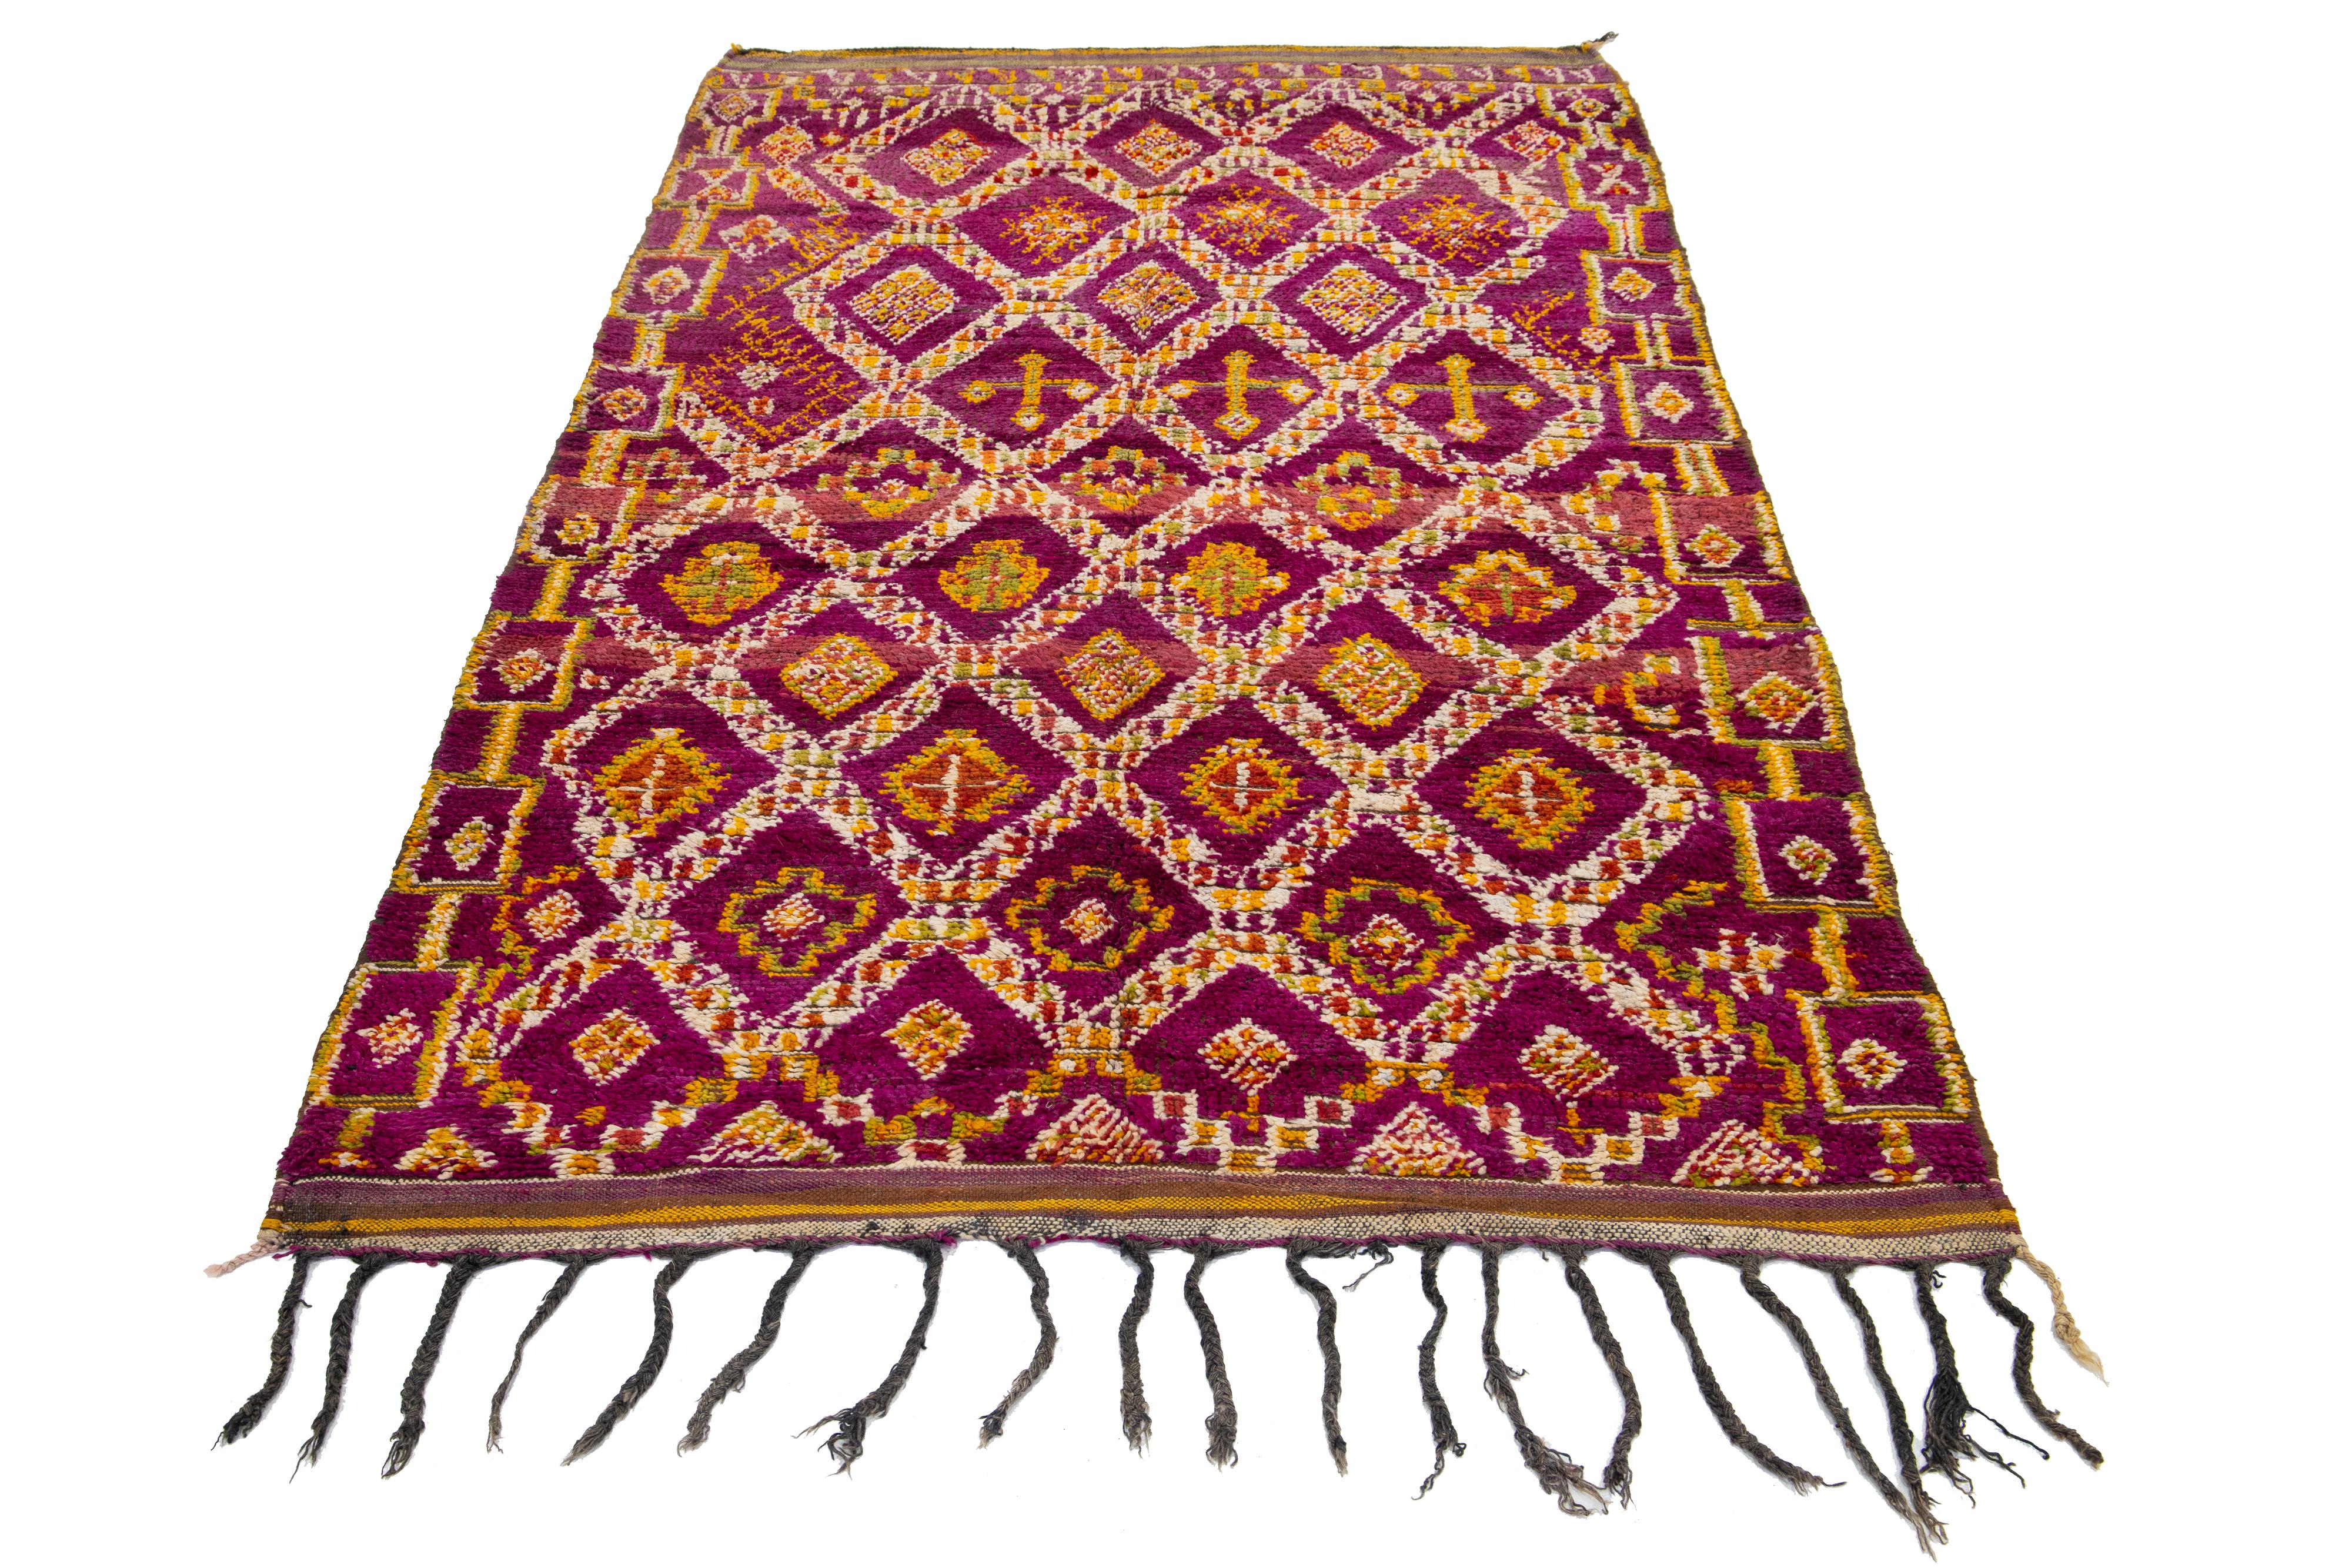 A beautiful, vintage 1960s Moroccan wool rug featuring a purple field adorned with a repeating diamond design. The rug showcases bright yellow, green, orange, and ivory accents throughout its tribal-inspired pattern.

This rug measures 5'2